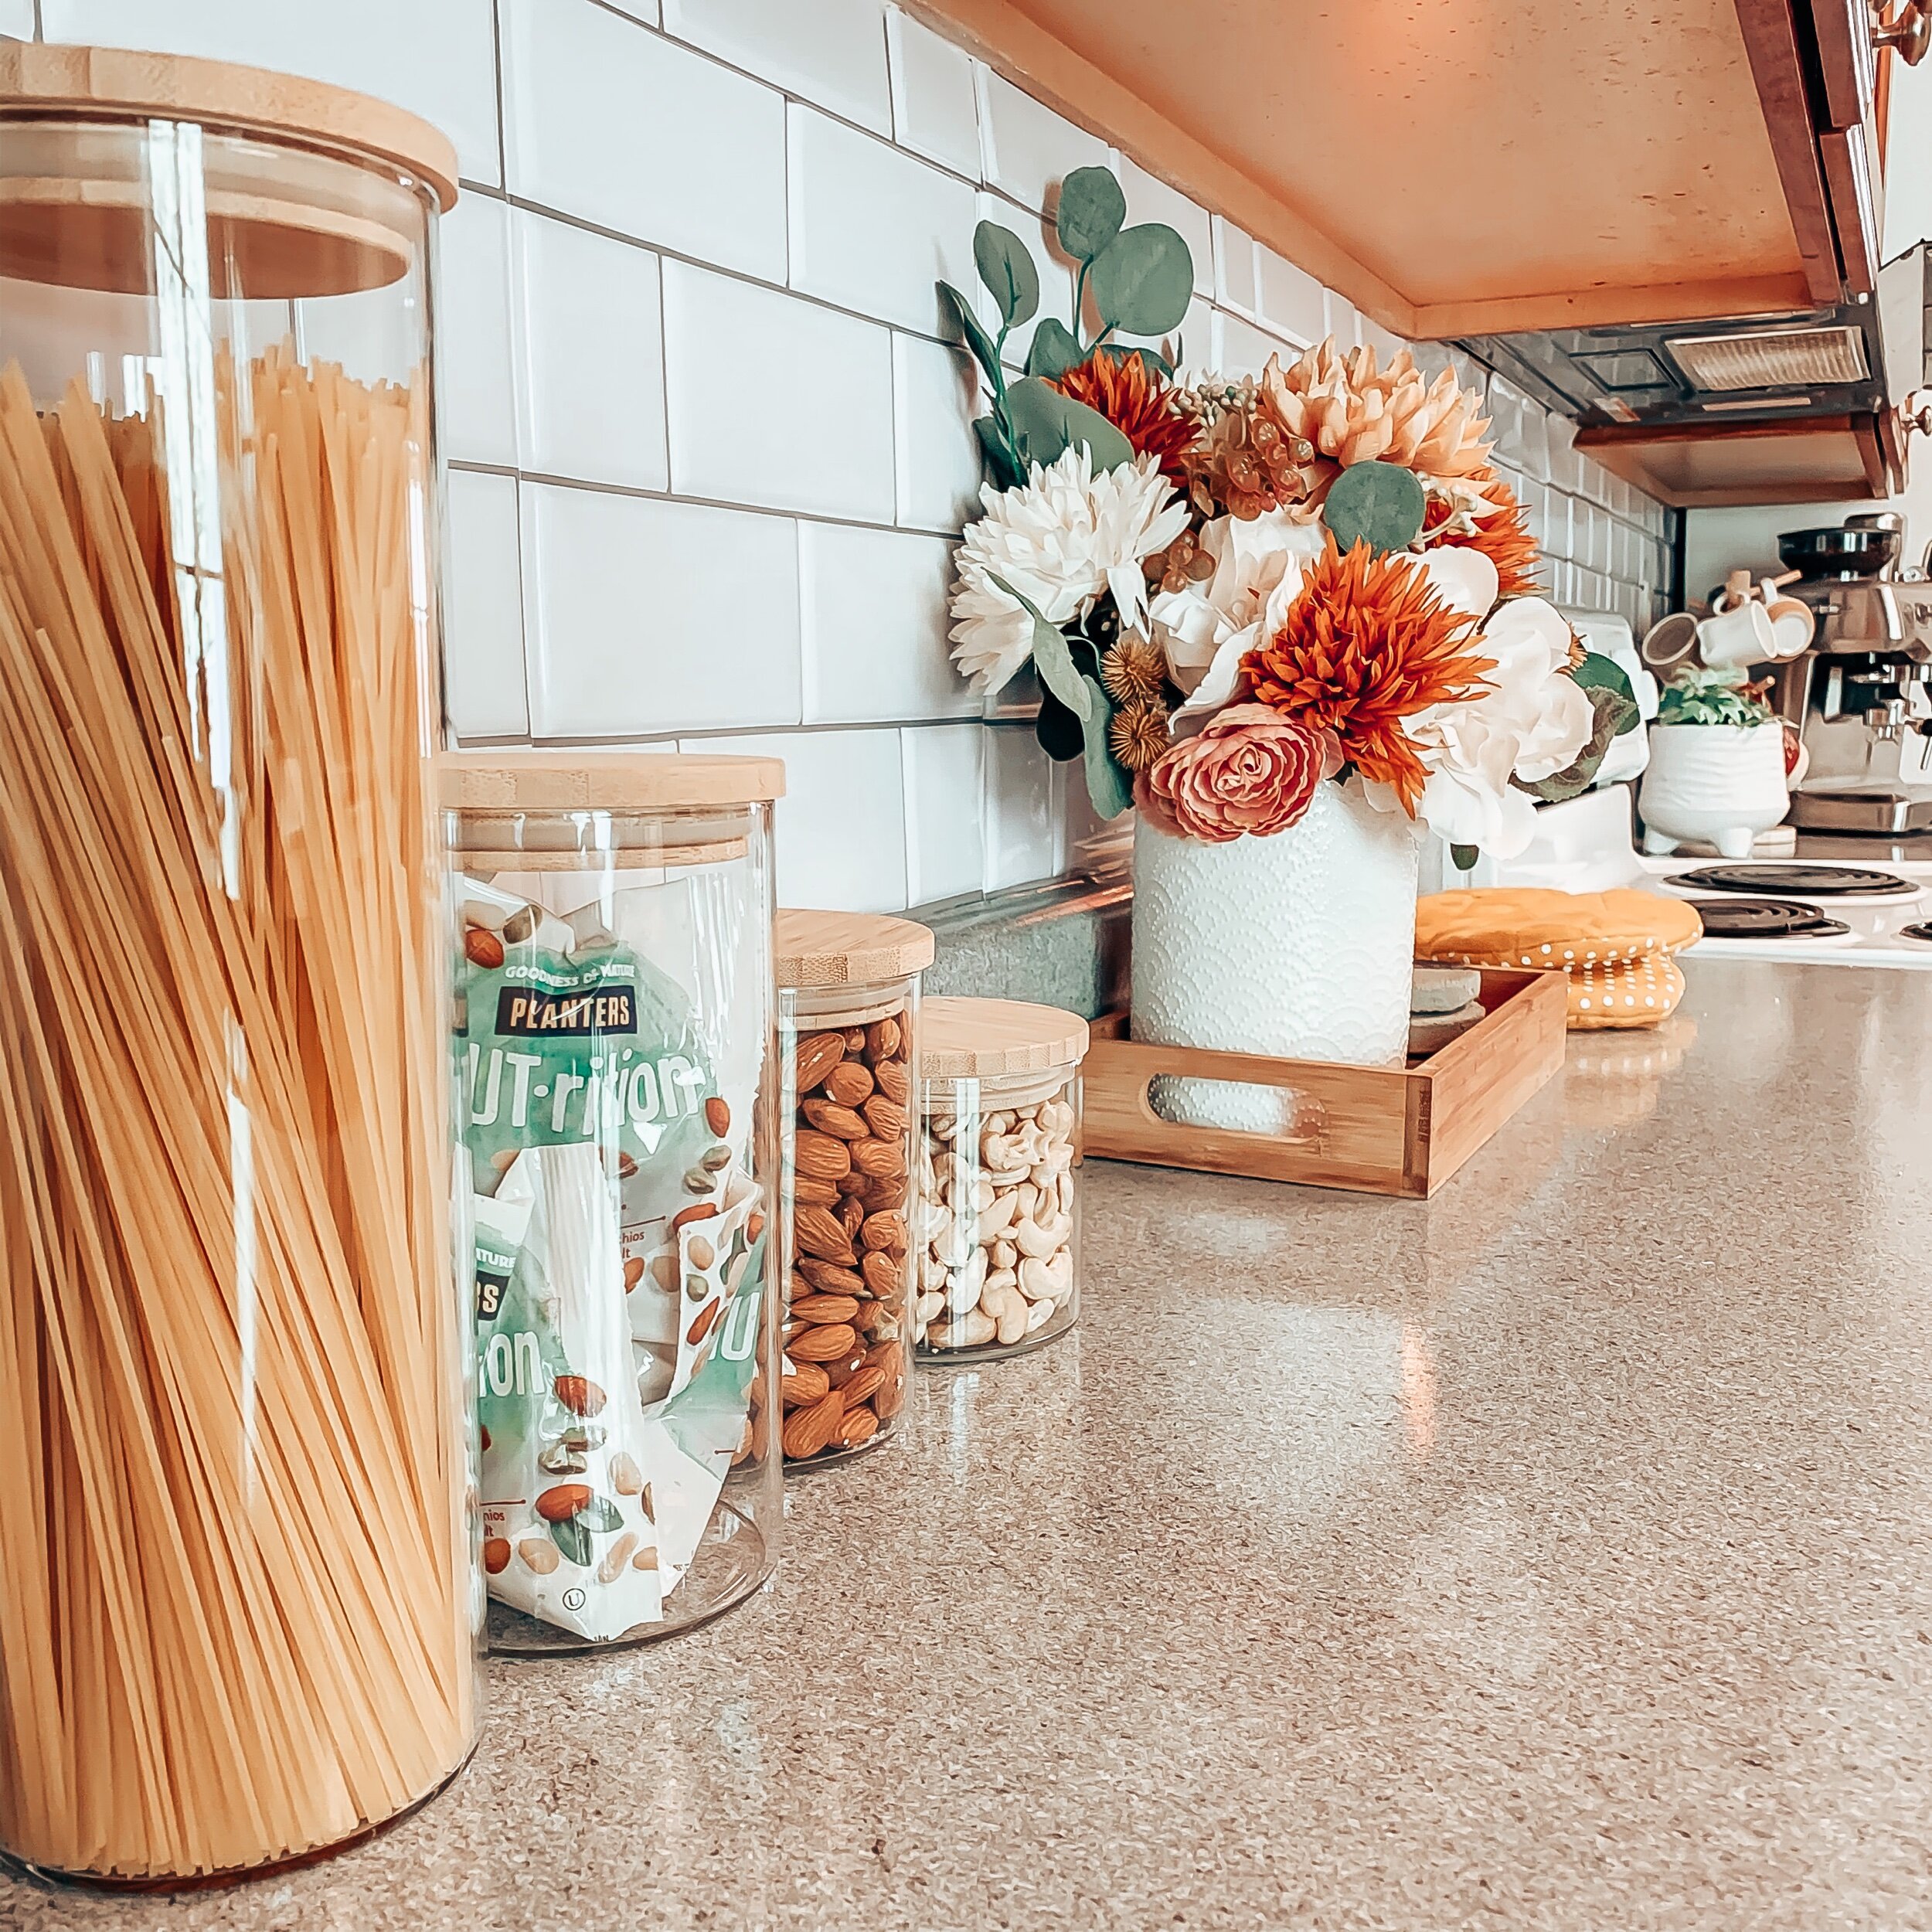 Tap to purchase these beautiful glass bamboo top canisters HERE! They are from one of my favorite companies Honey-can-do